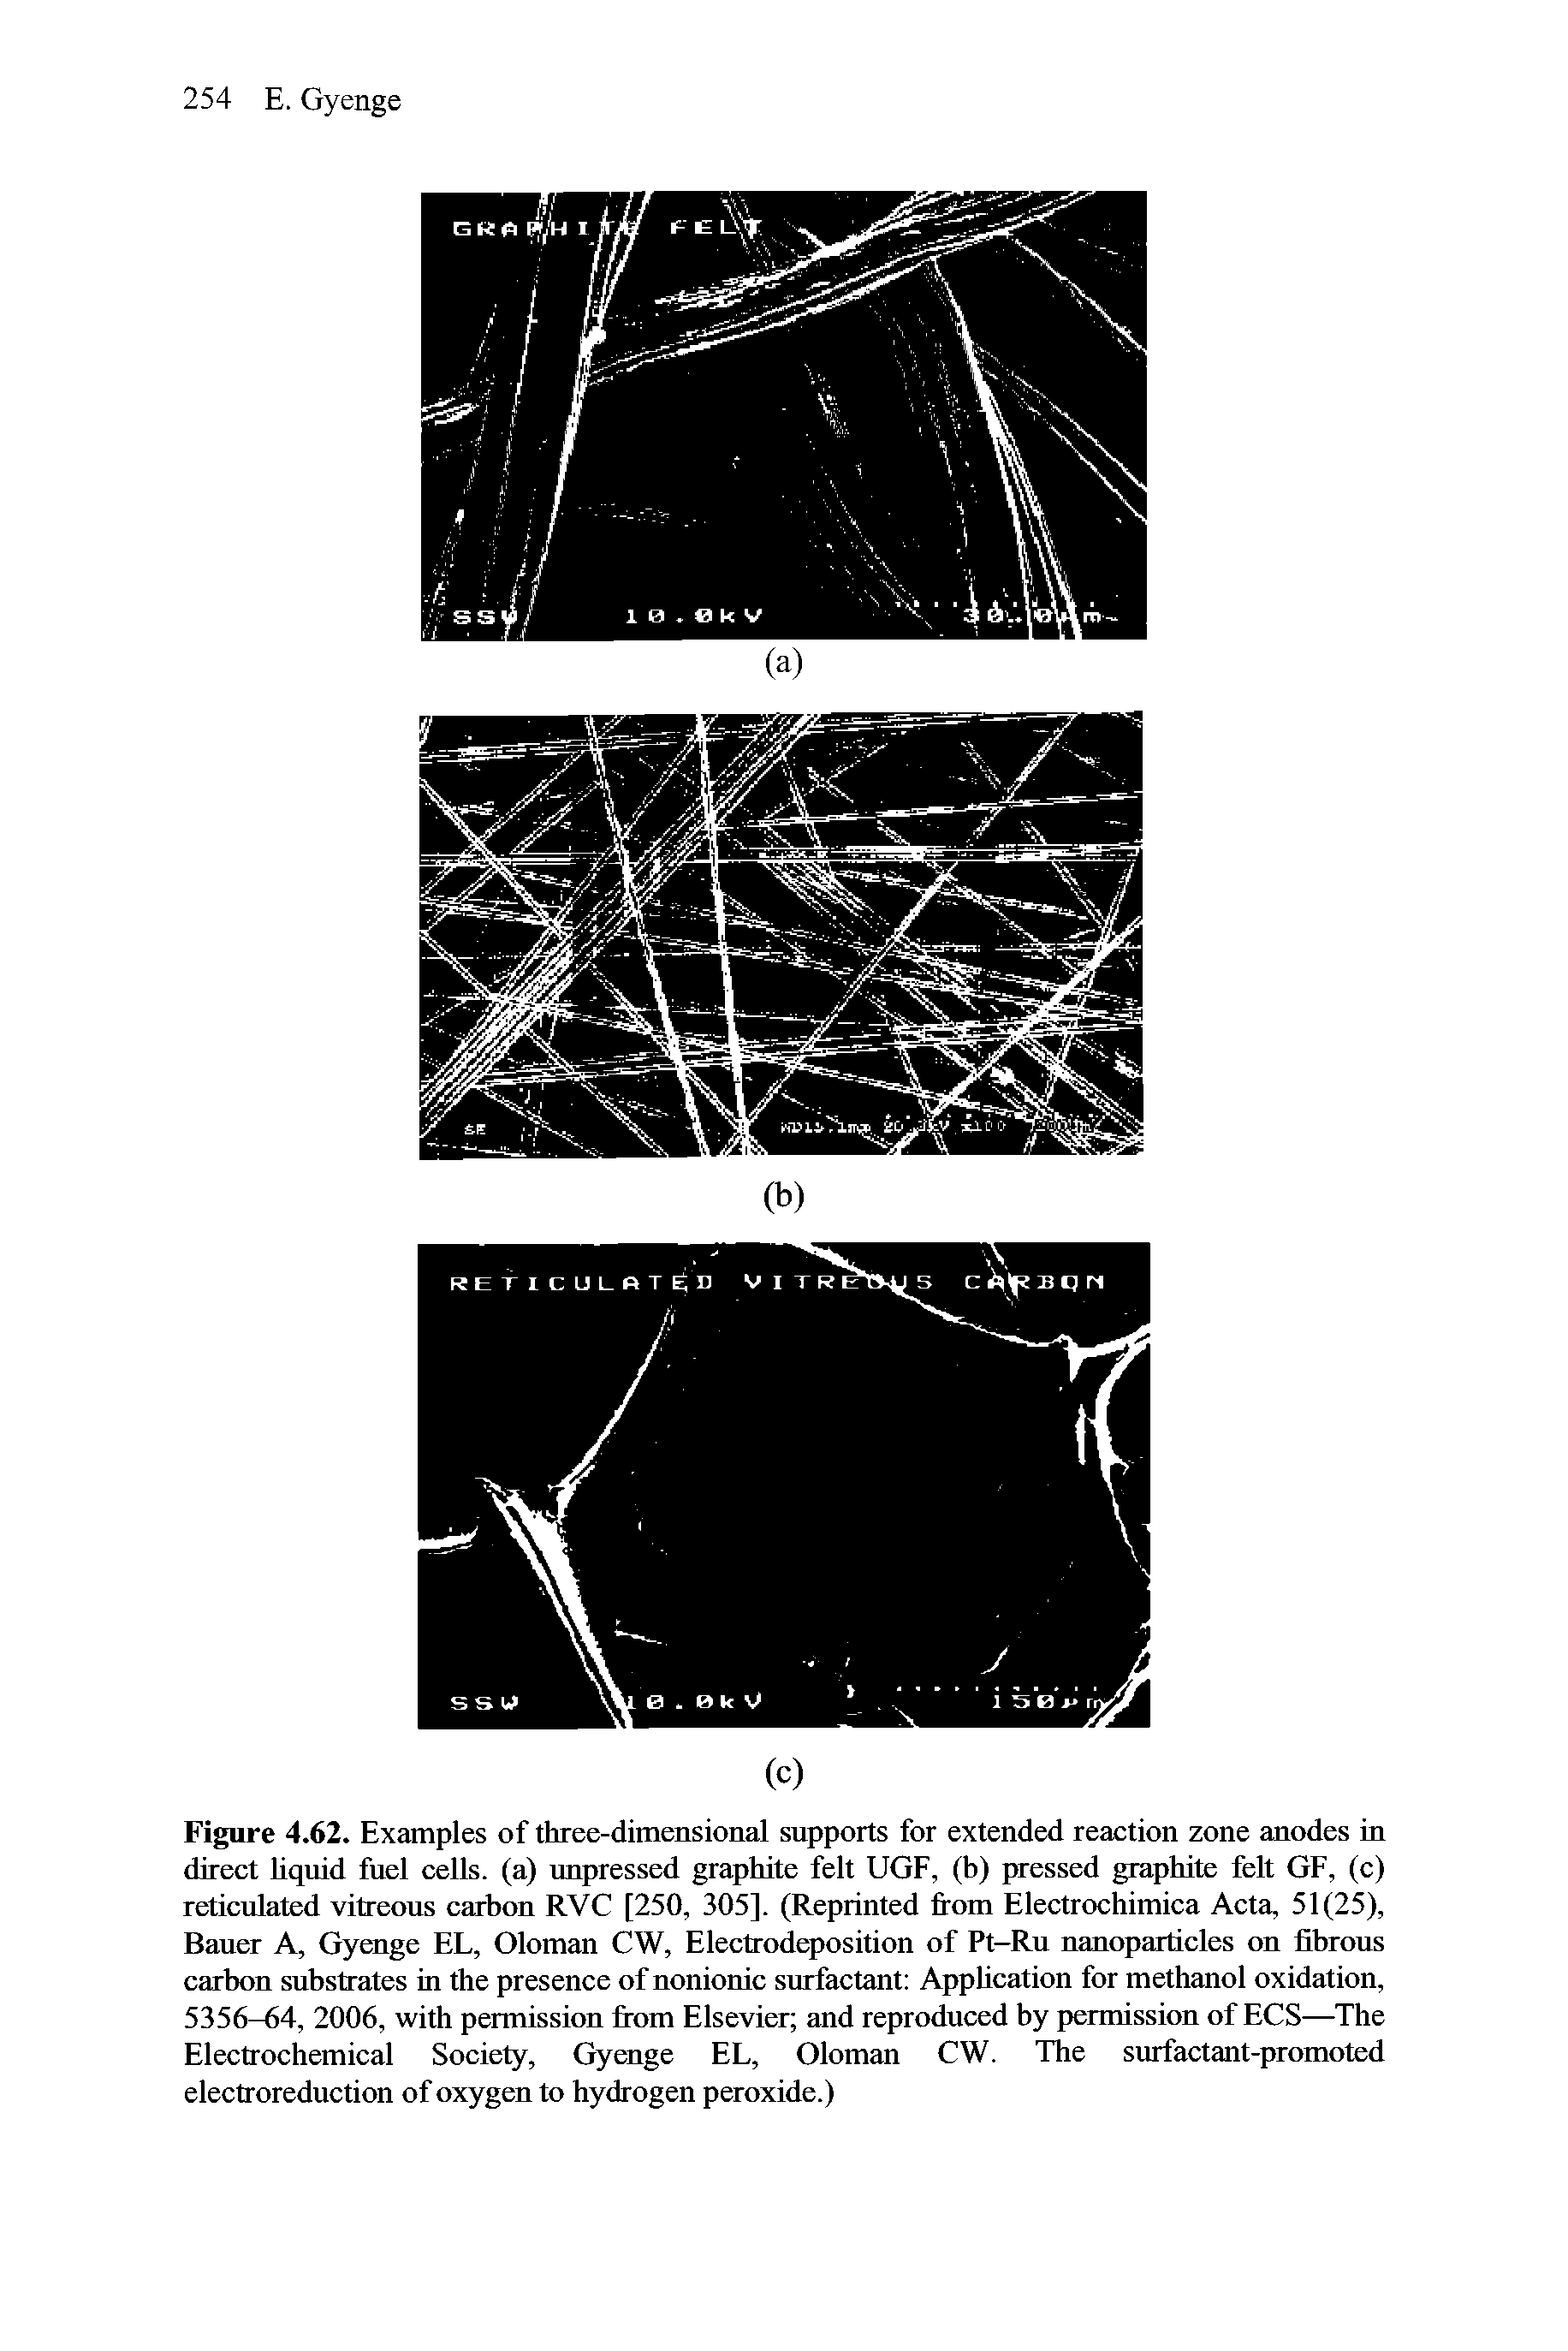 Figure 4.62. Examples of three-dimensional supports for extended reaction zone anodes in direct liquid fuel cells, (a) unpressed graphite felt UGF, (h) pressed graphite felt GF, (c) reticulated vitreous earhon RVC [250, 305]. (Reprinted from Electrochimica Acta, 51(25), Bauer A, Gyenge EL, Oloman CW, Eleetrodeposition of Pt-Ru nanoparticles on fibrous carbon substrates in the presence of nonionie surfactant Apphcation for methanol oxidation, 5356-64, 2006, with permission from Elsevier, and reproduced by permission of ECS— The Electrochemical Society, Gyenge EL, Oloman CW. The surfactant-promoted electroreduction of oxygen to hydrogen peroxide.)...